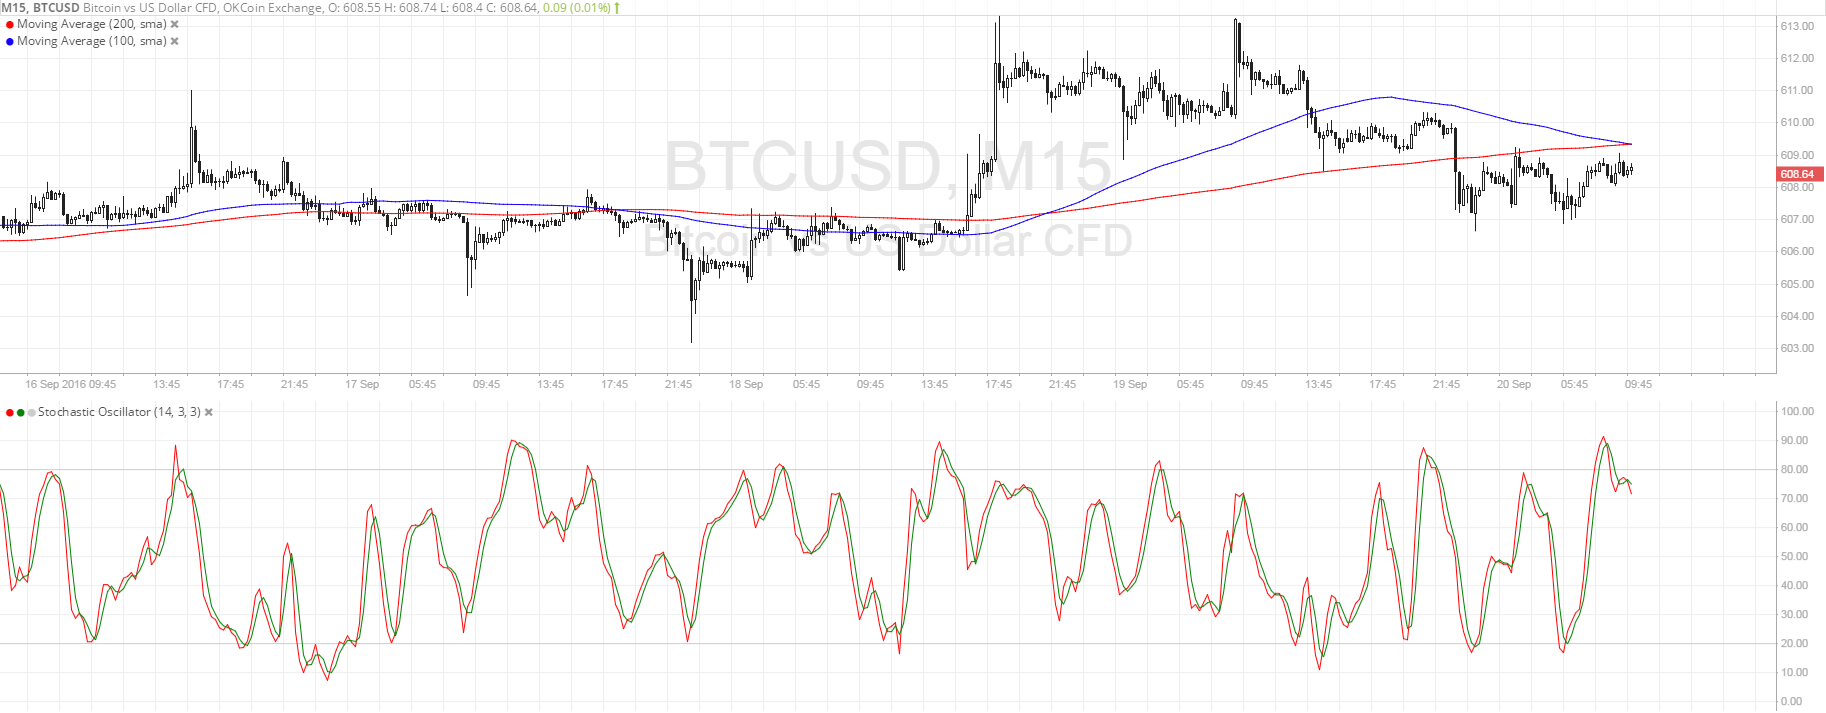 Bitcoin Price Technical Analysis for 09/20/2016 - Aiming for Next Support?